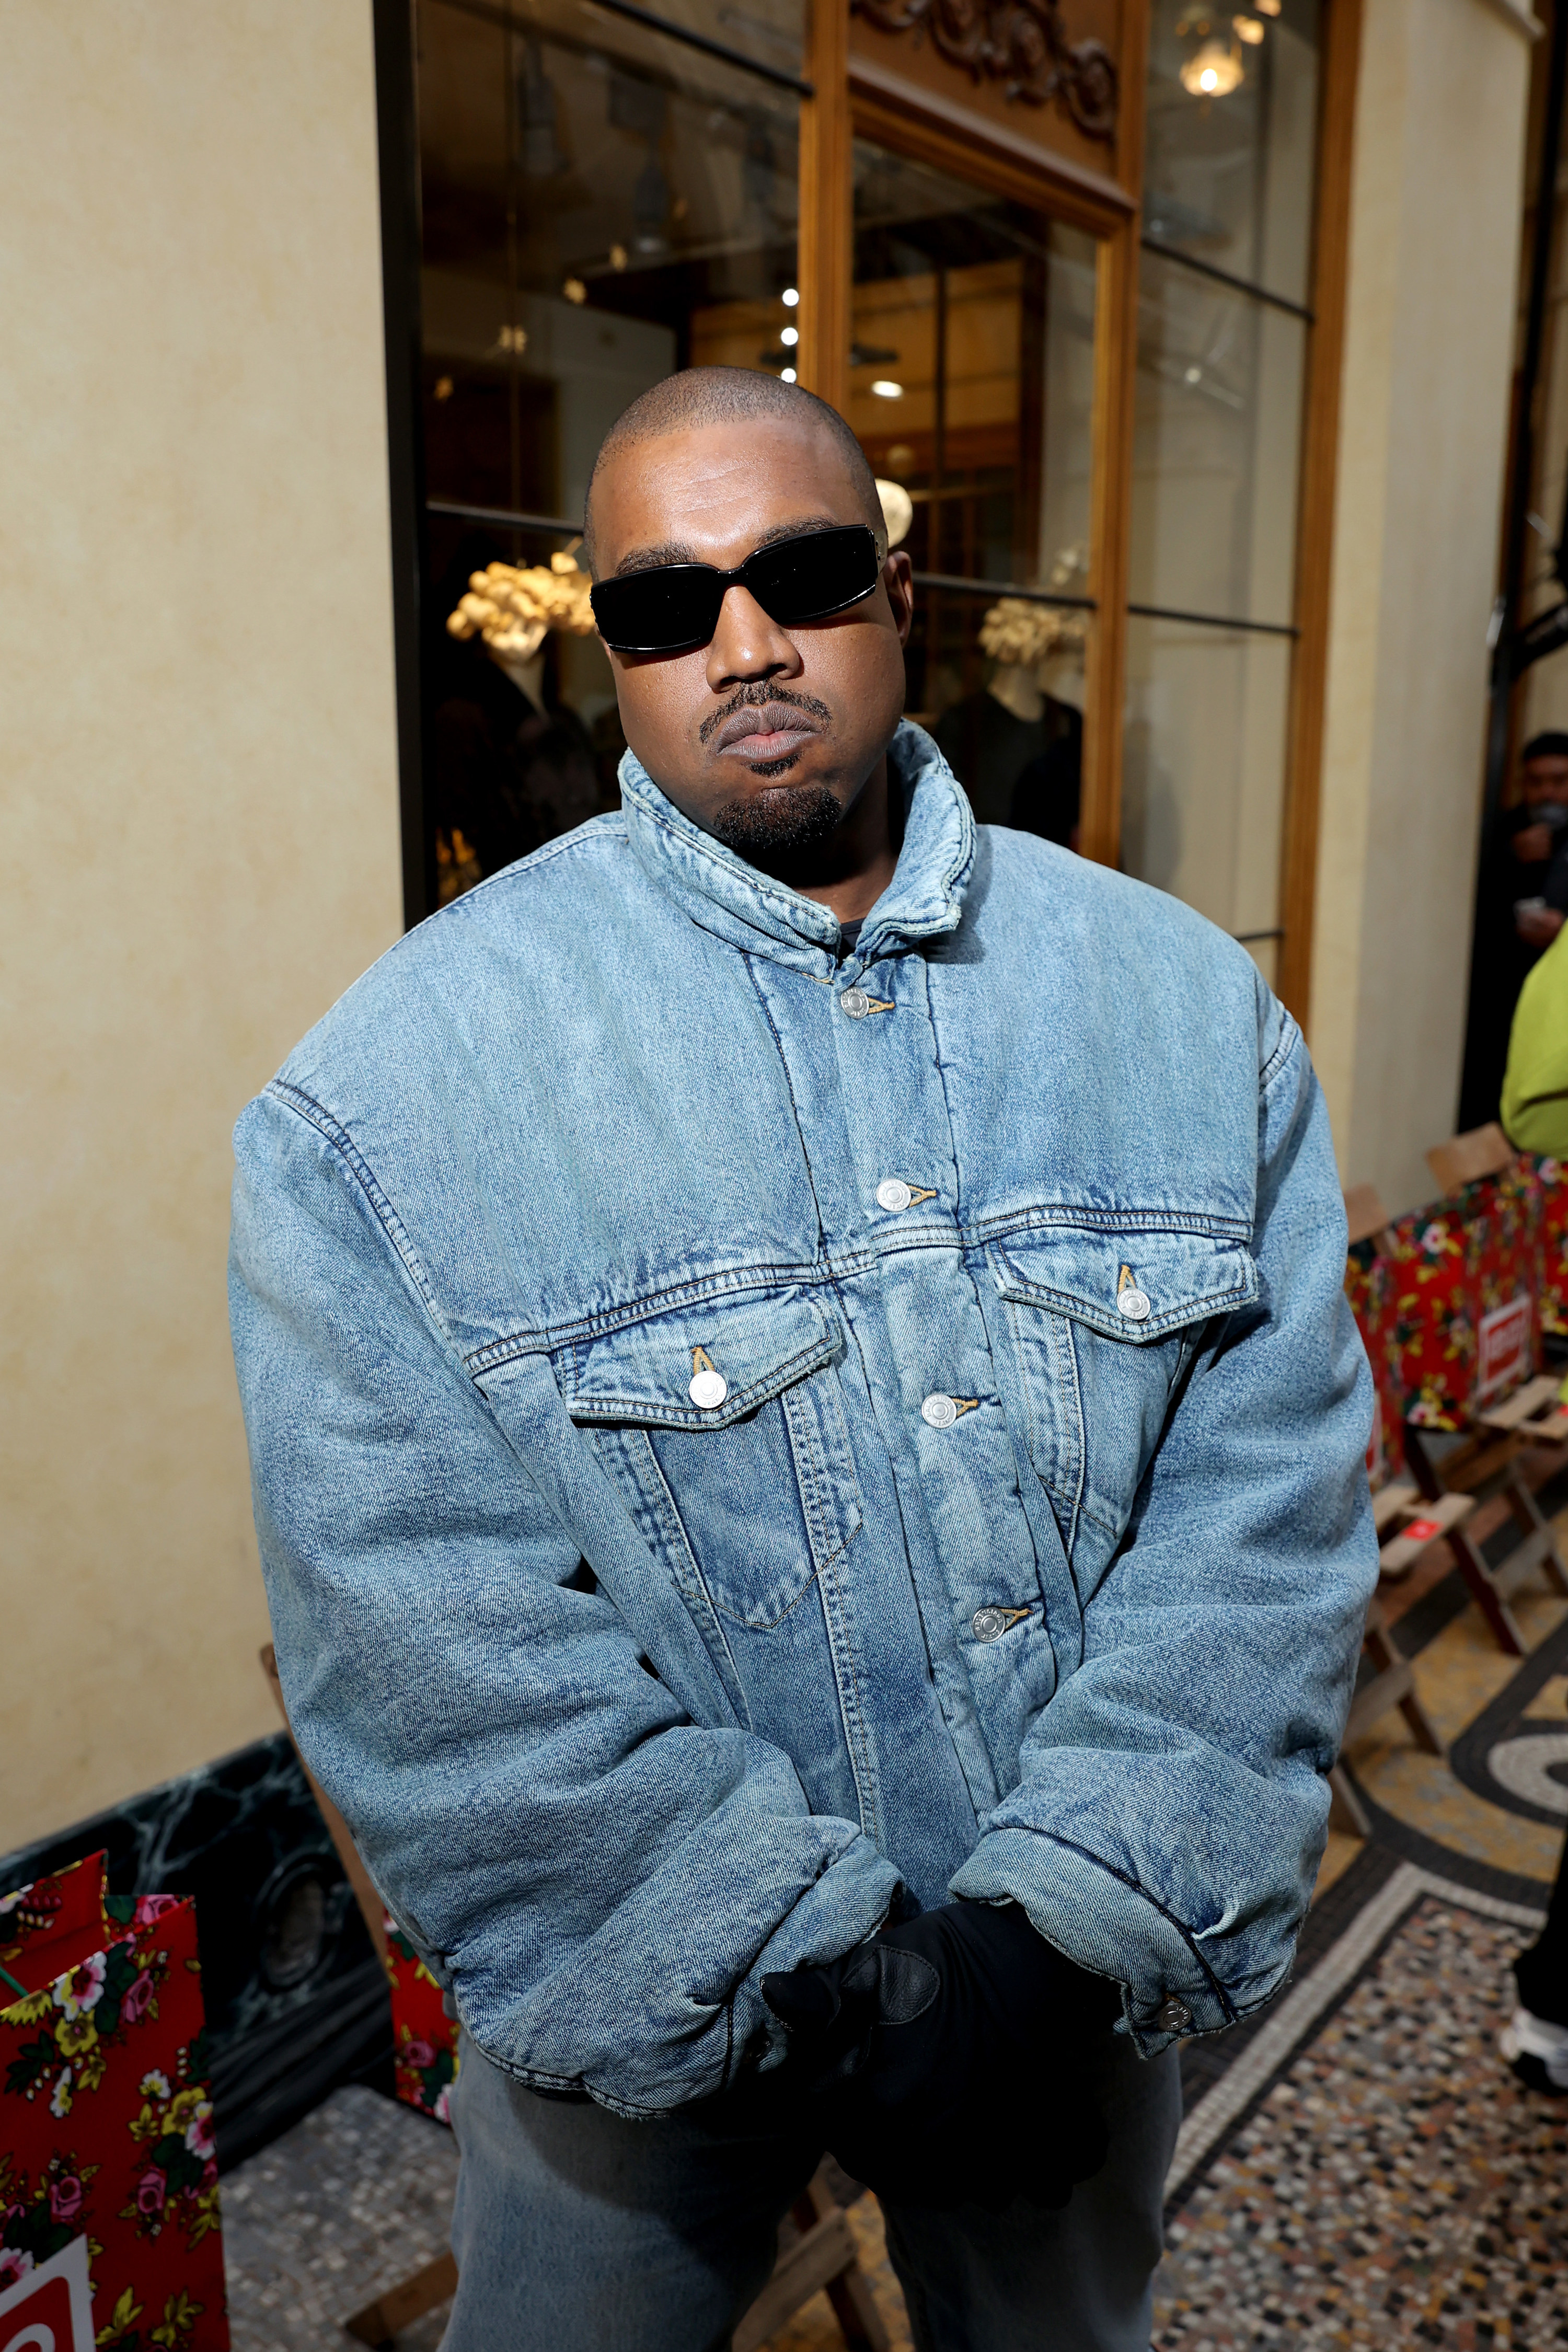 Kanye posing for a photo wearing an all-denim outfit and sunglasses